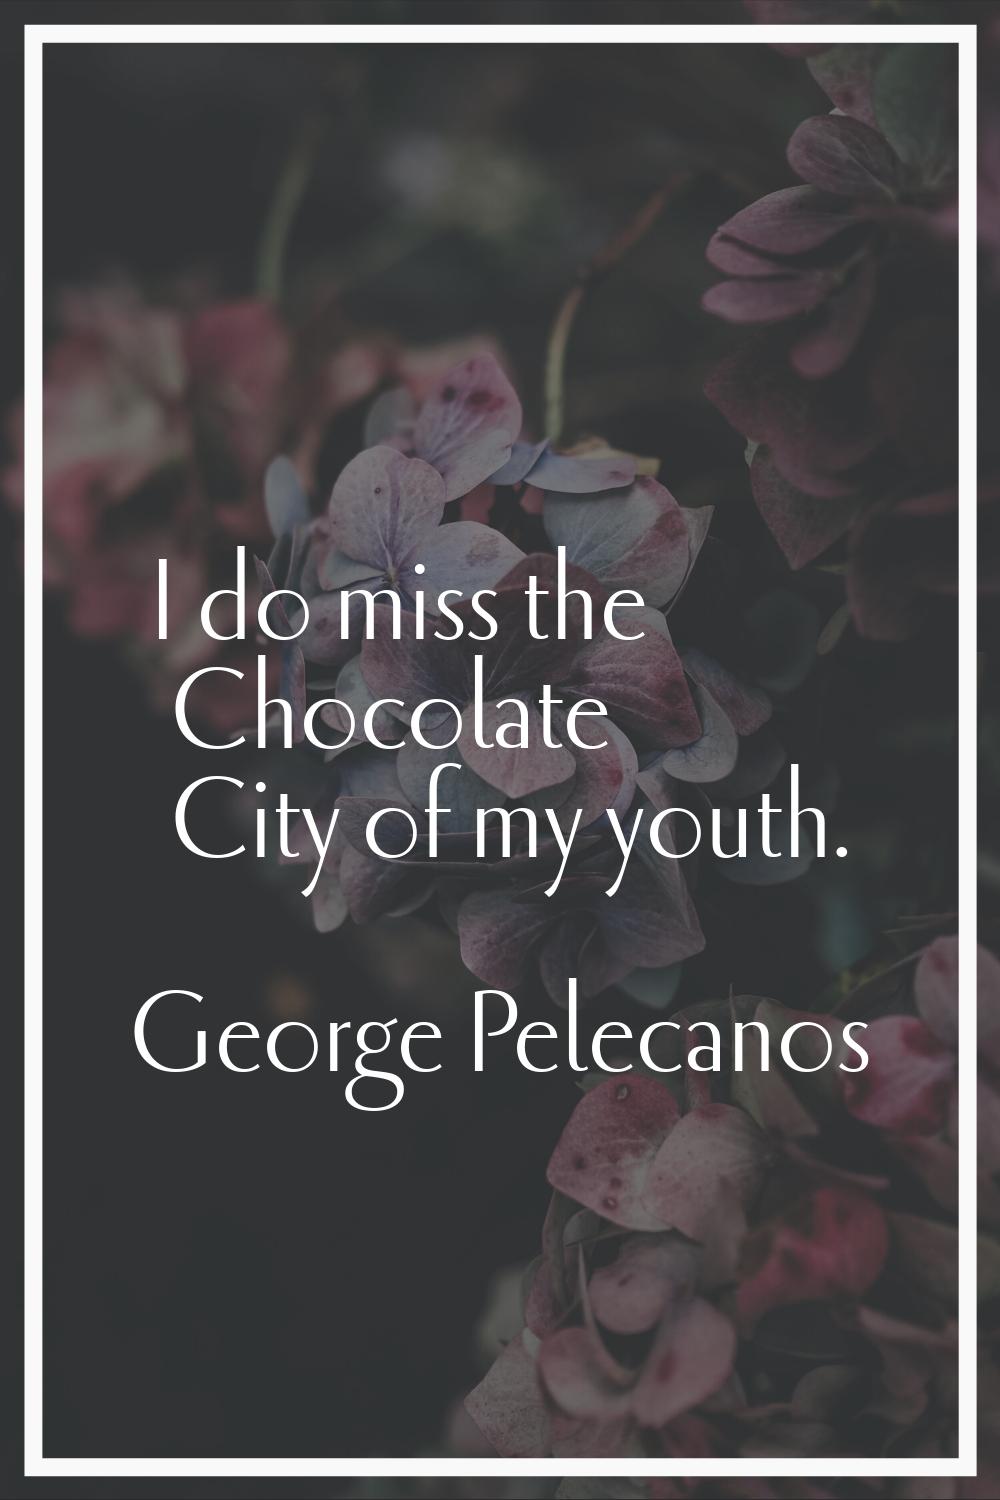 I do miss the Chocolate City of my youth.